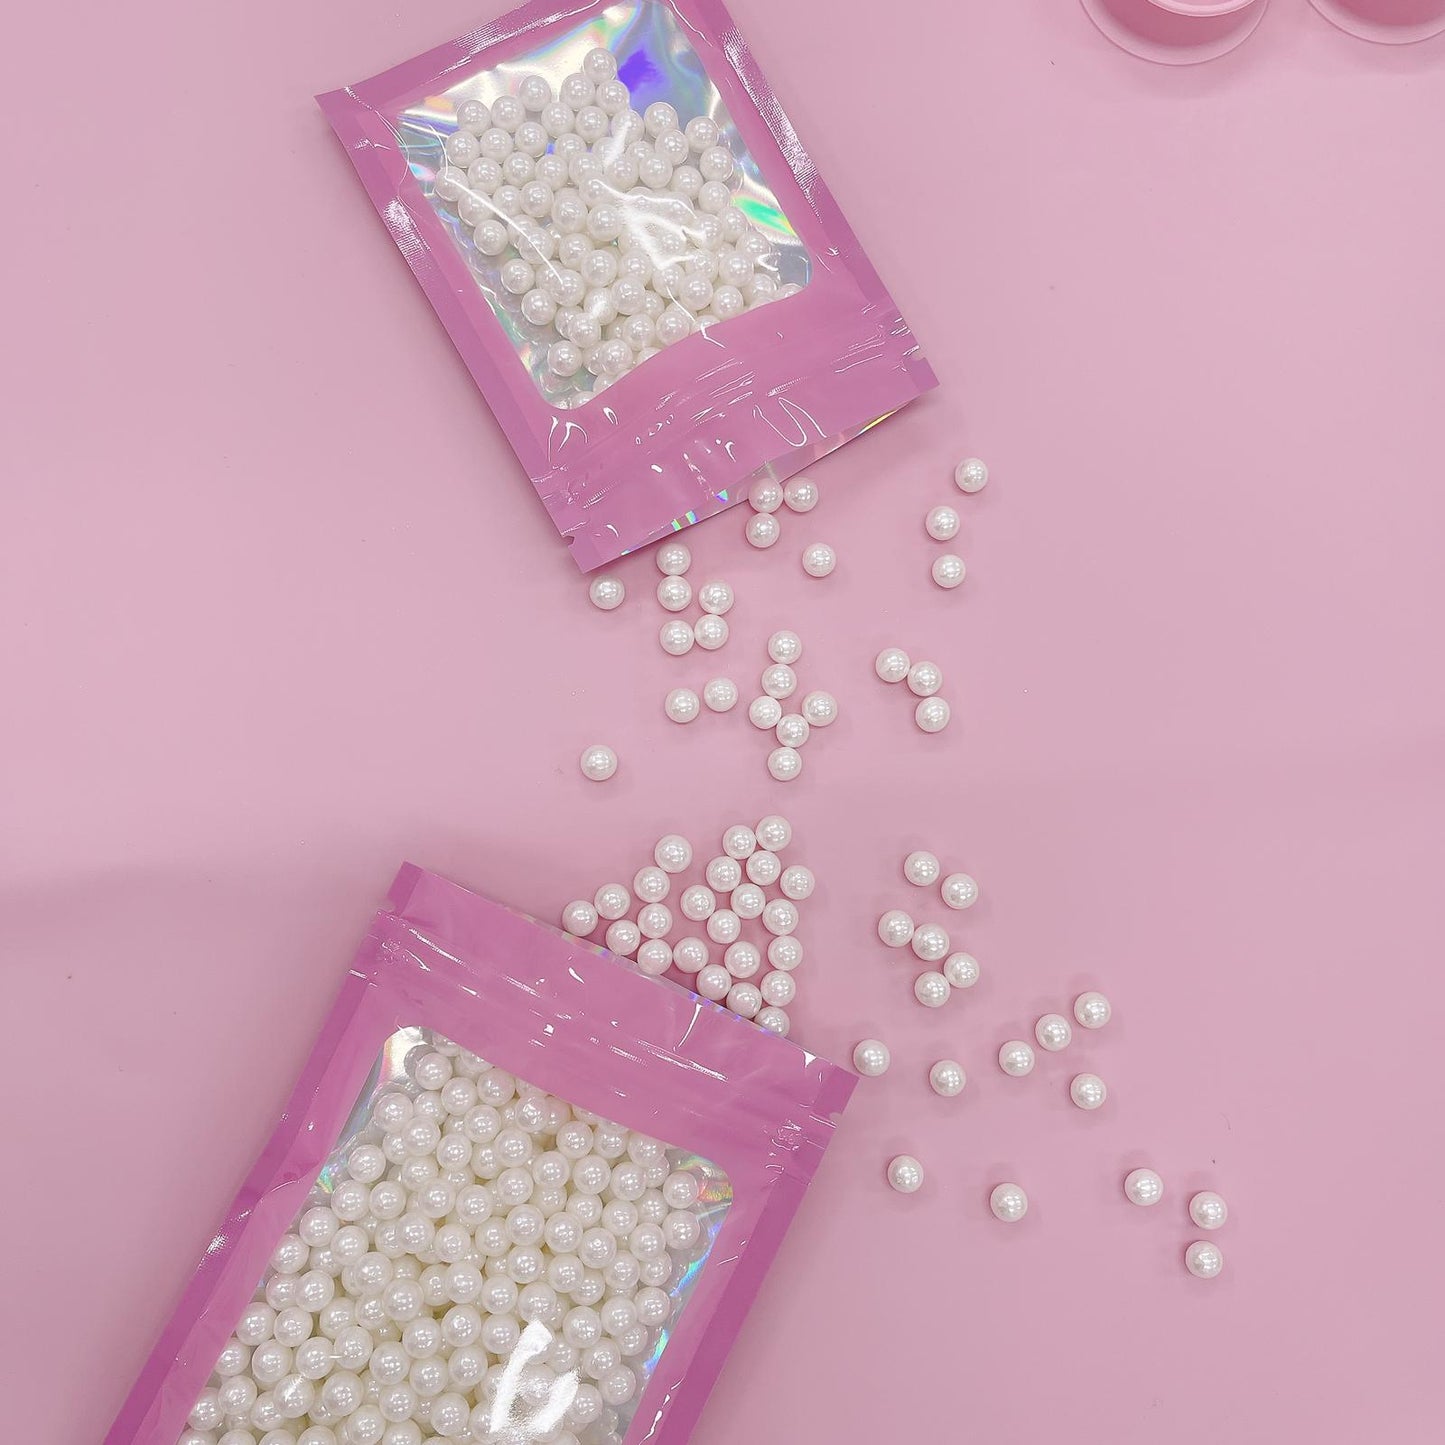 Limited Edition - More Bloody Sprinkles - 5mm White Balls